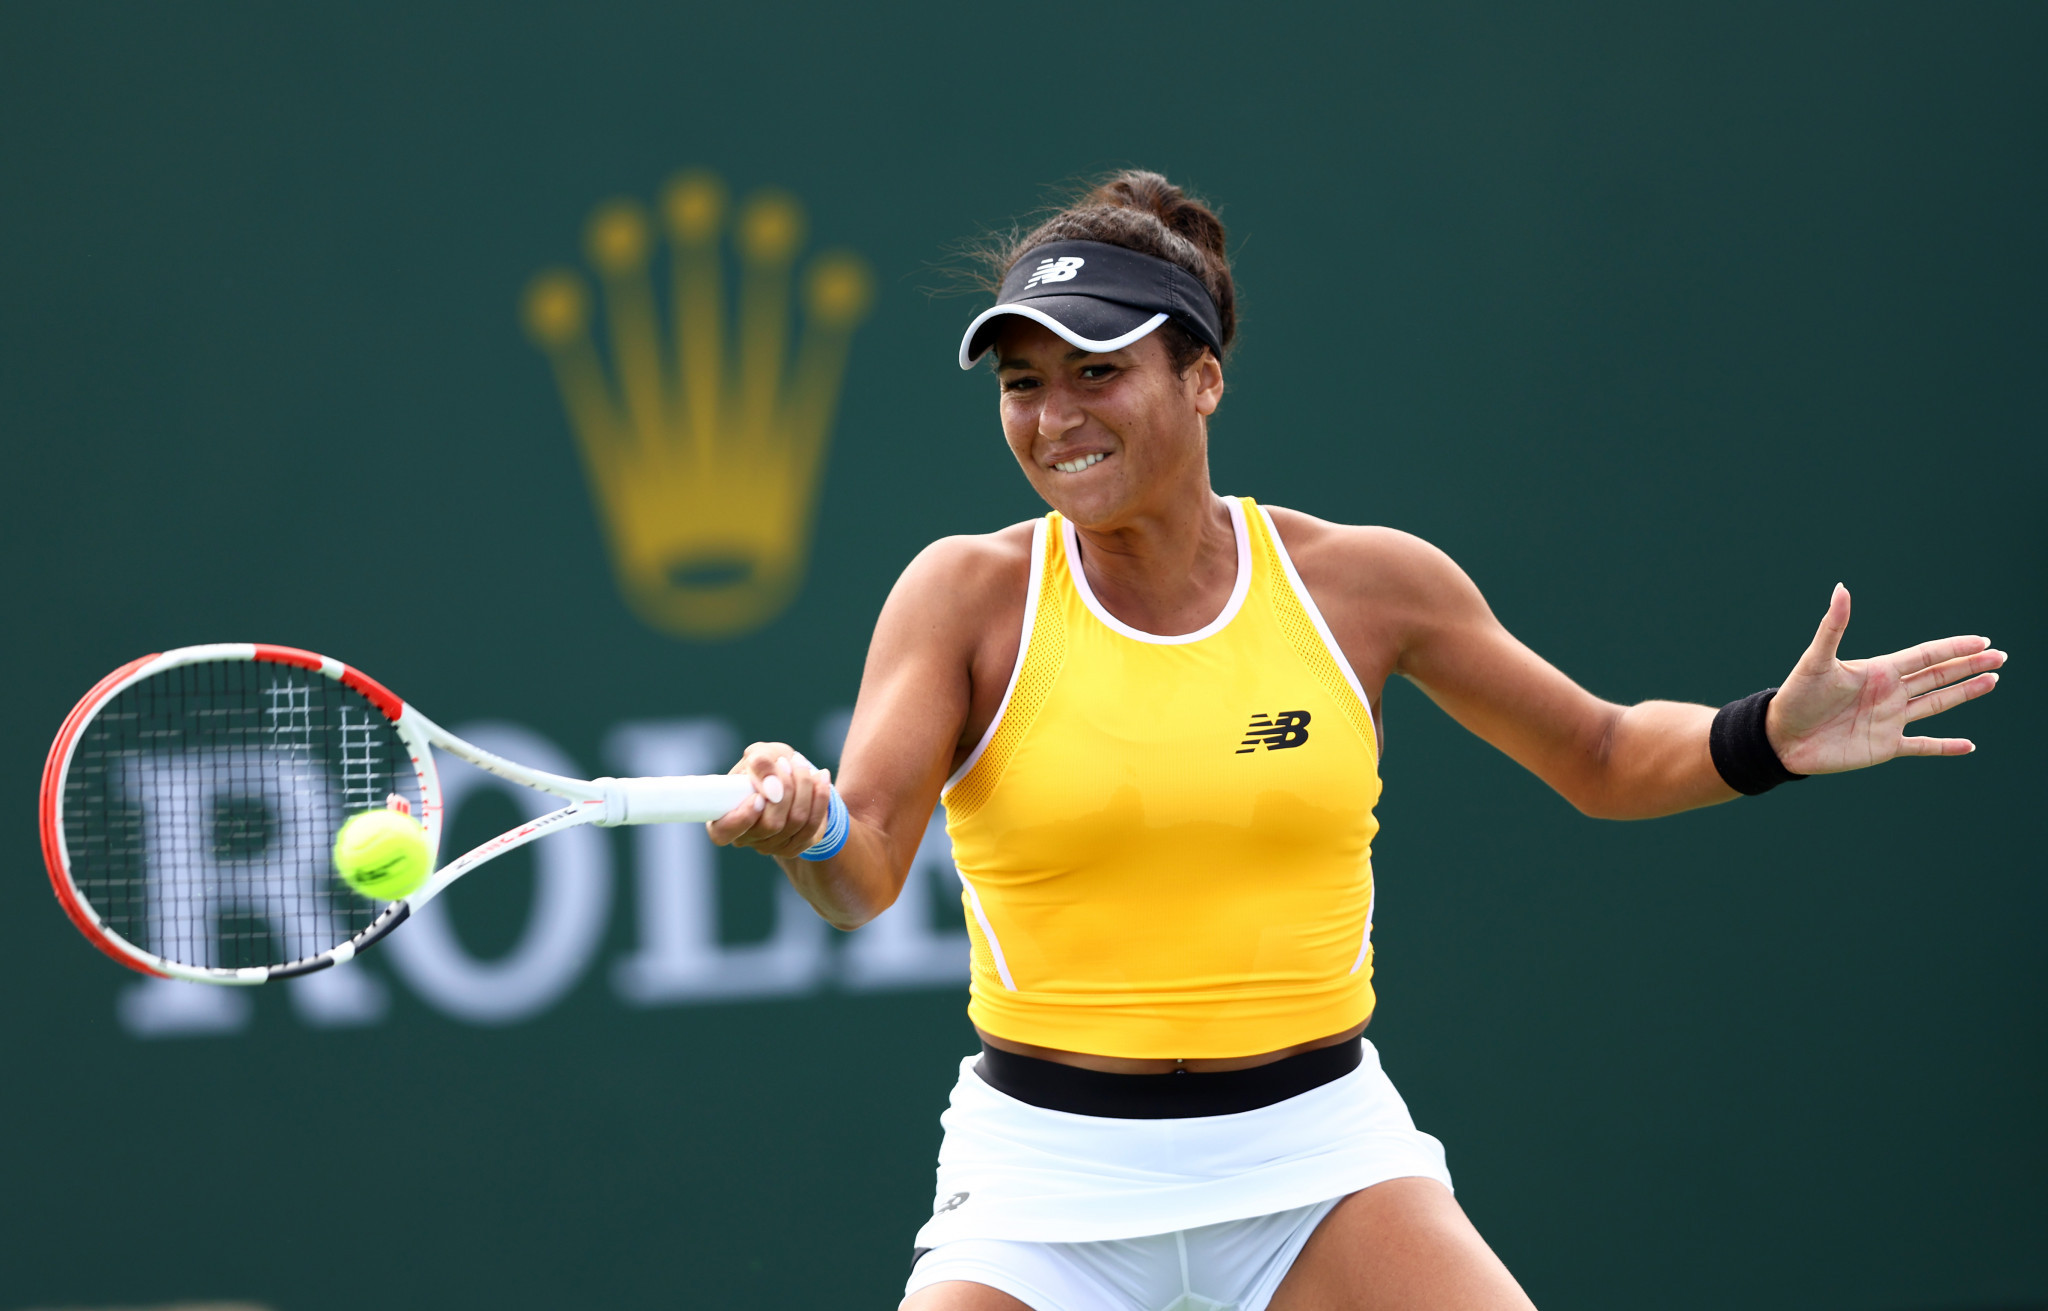 Britain's Heather Watson triumphed in the longest match of the day on day one of the WTA Miami Open, needing just under three and a half hours to beat Arantxa Rus ©Getty Images